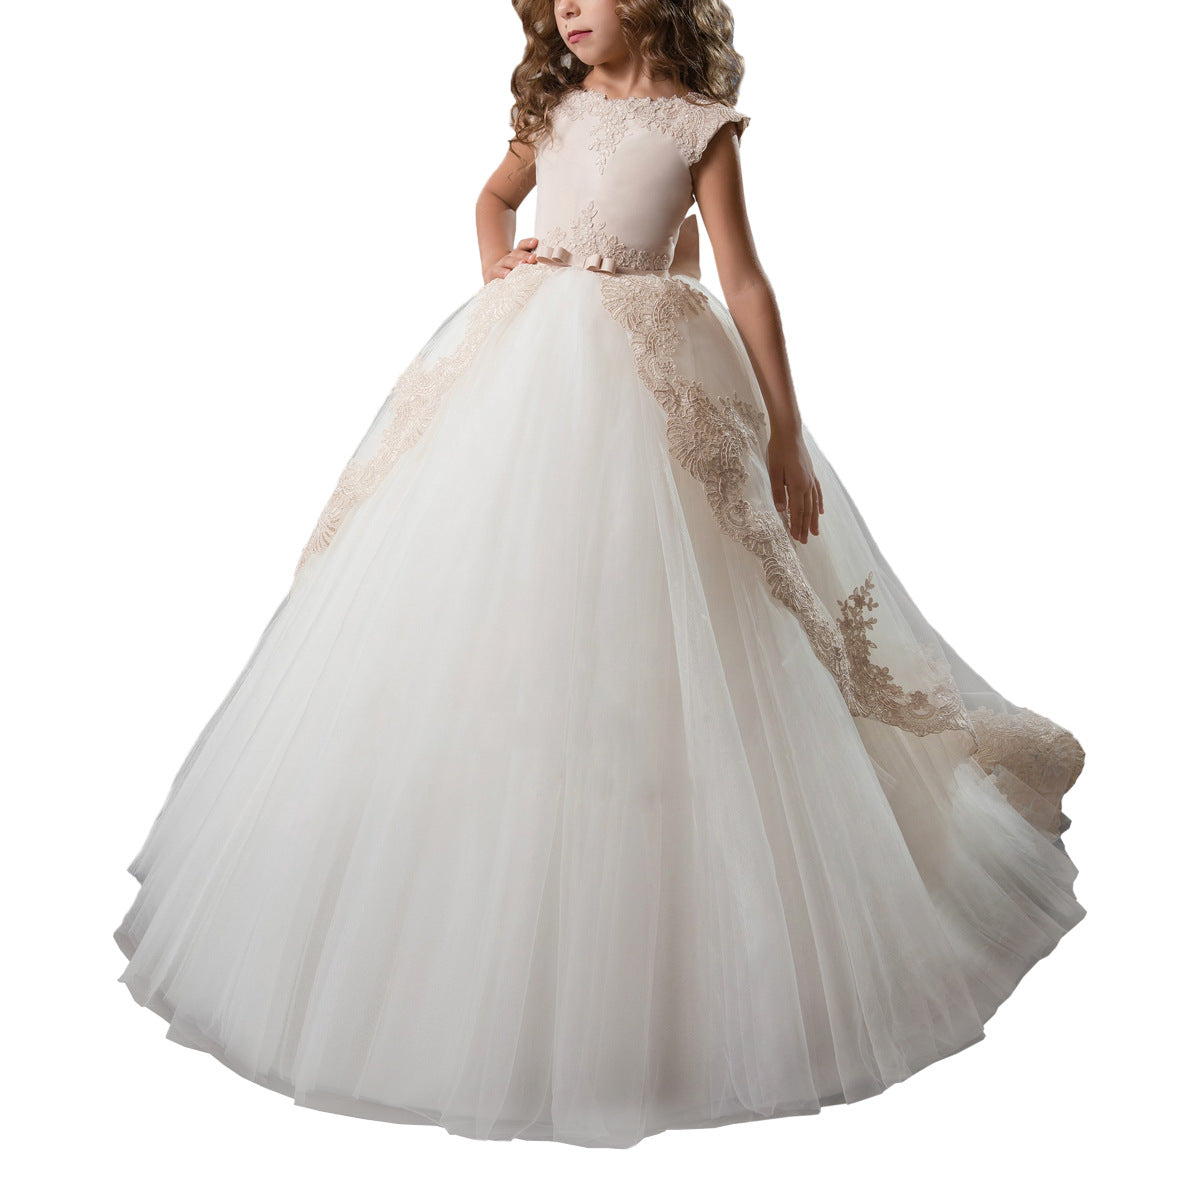 Stylish White Flower Girls Dress For Wedding Party High Neck Baptism Gowns  Tulle Full Sleeve Appliques Kid Holy Communion Gown